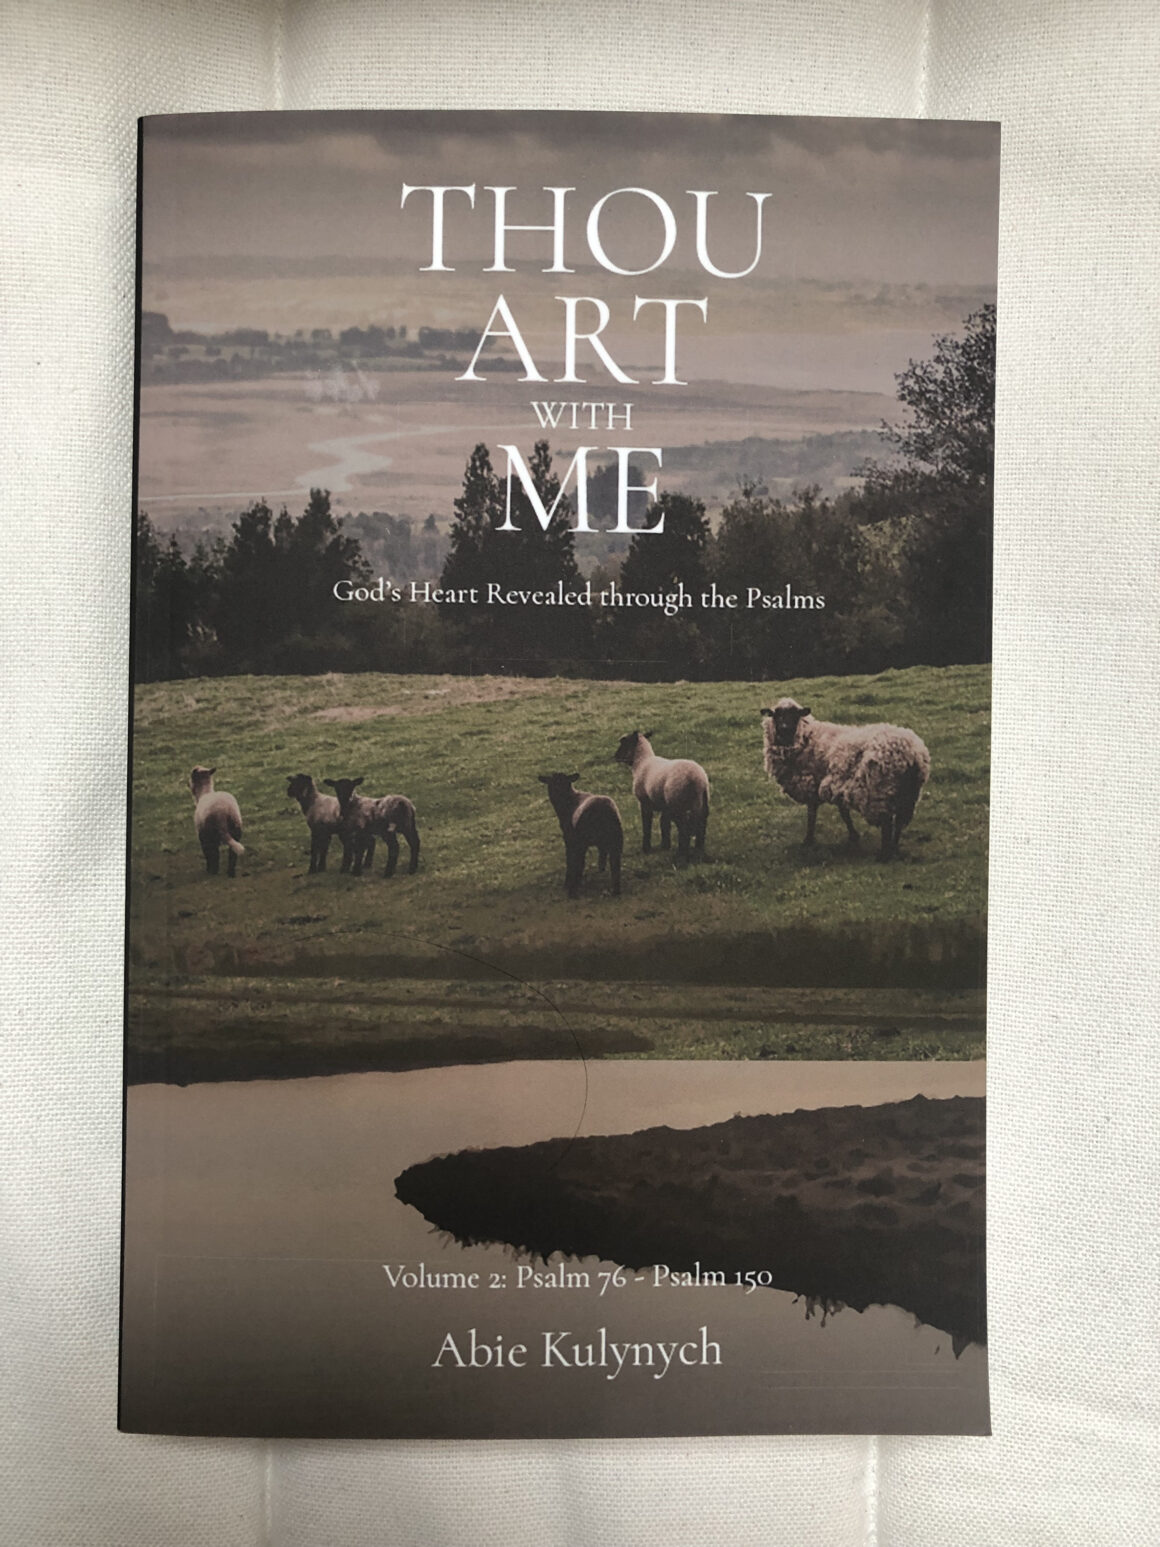 Thou Art With Me: Volume 2 is now available!